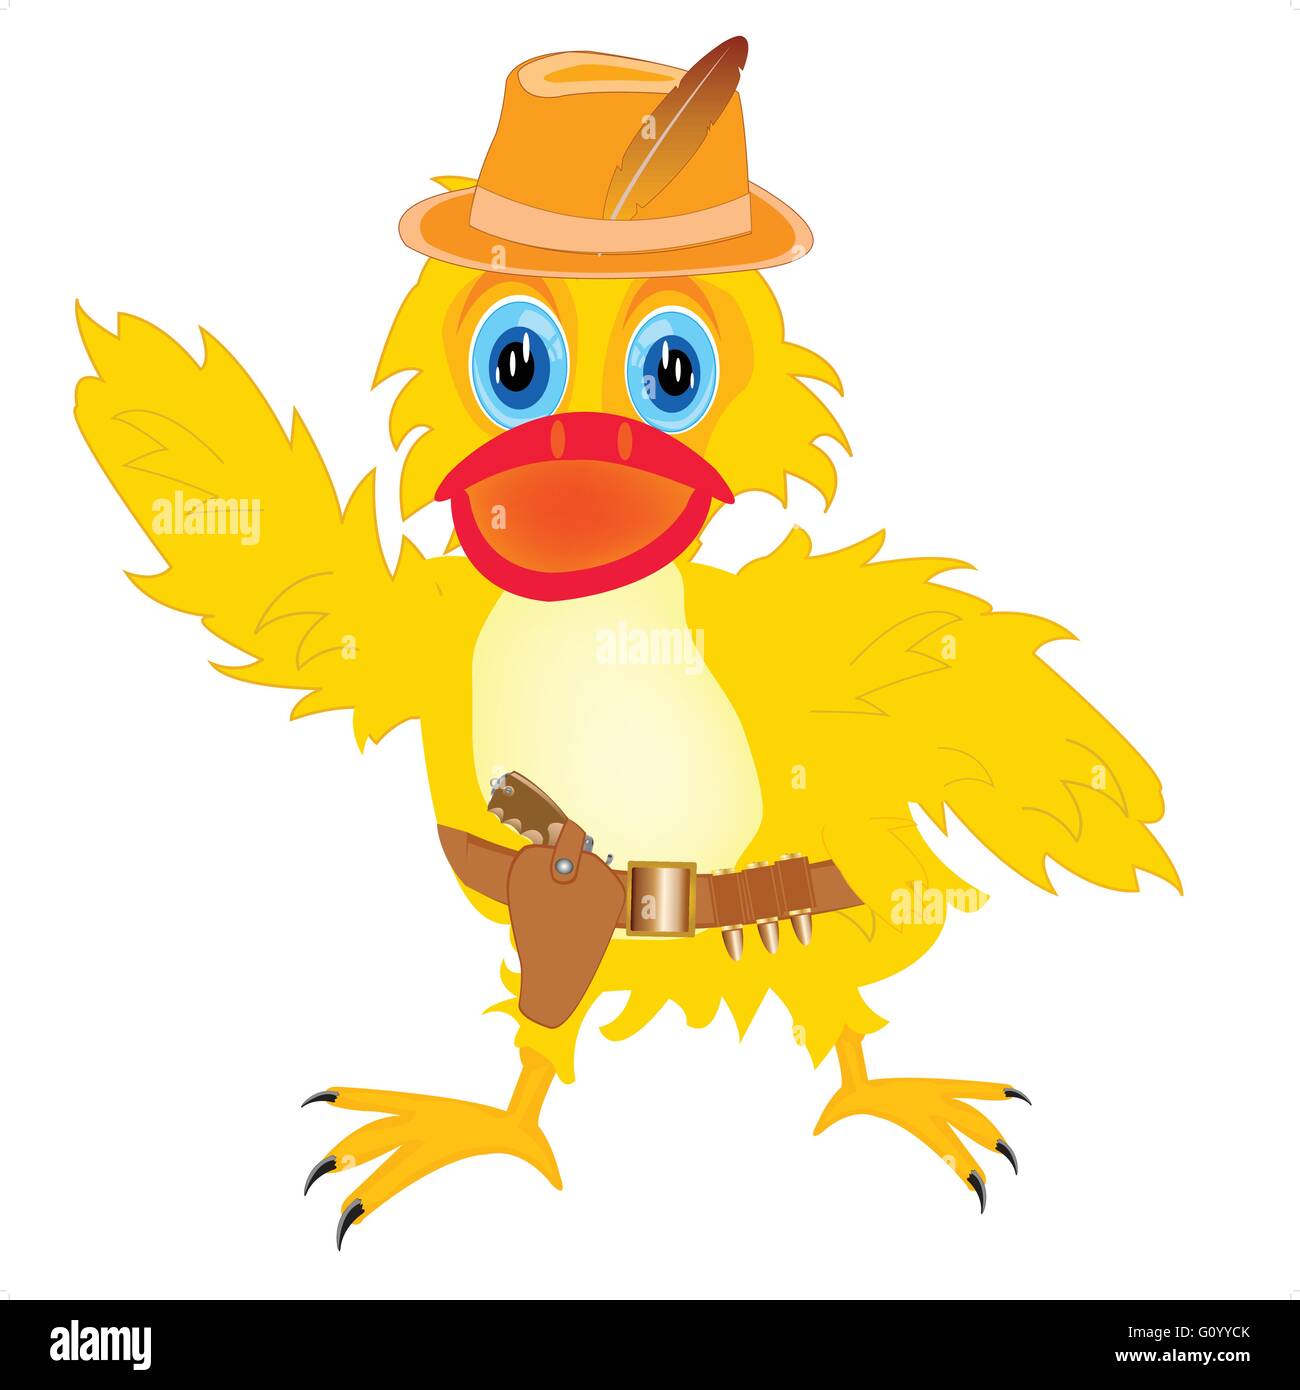 https://c8.alamy.com/comp/G0YYCK/cartoon-of-the-duck-in-hat-with-gun-on-white-background-G0YYCK.jpg